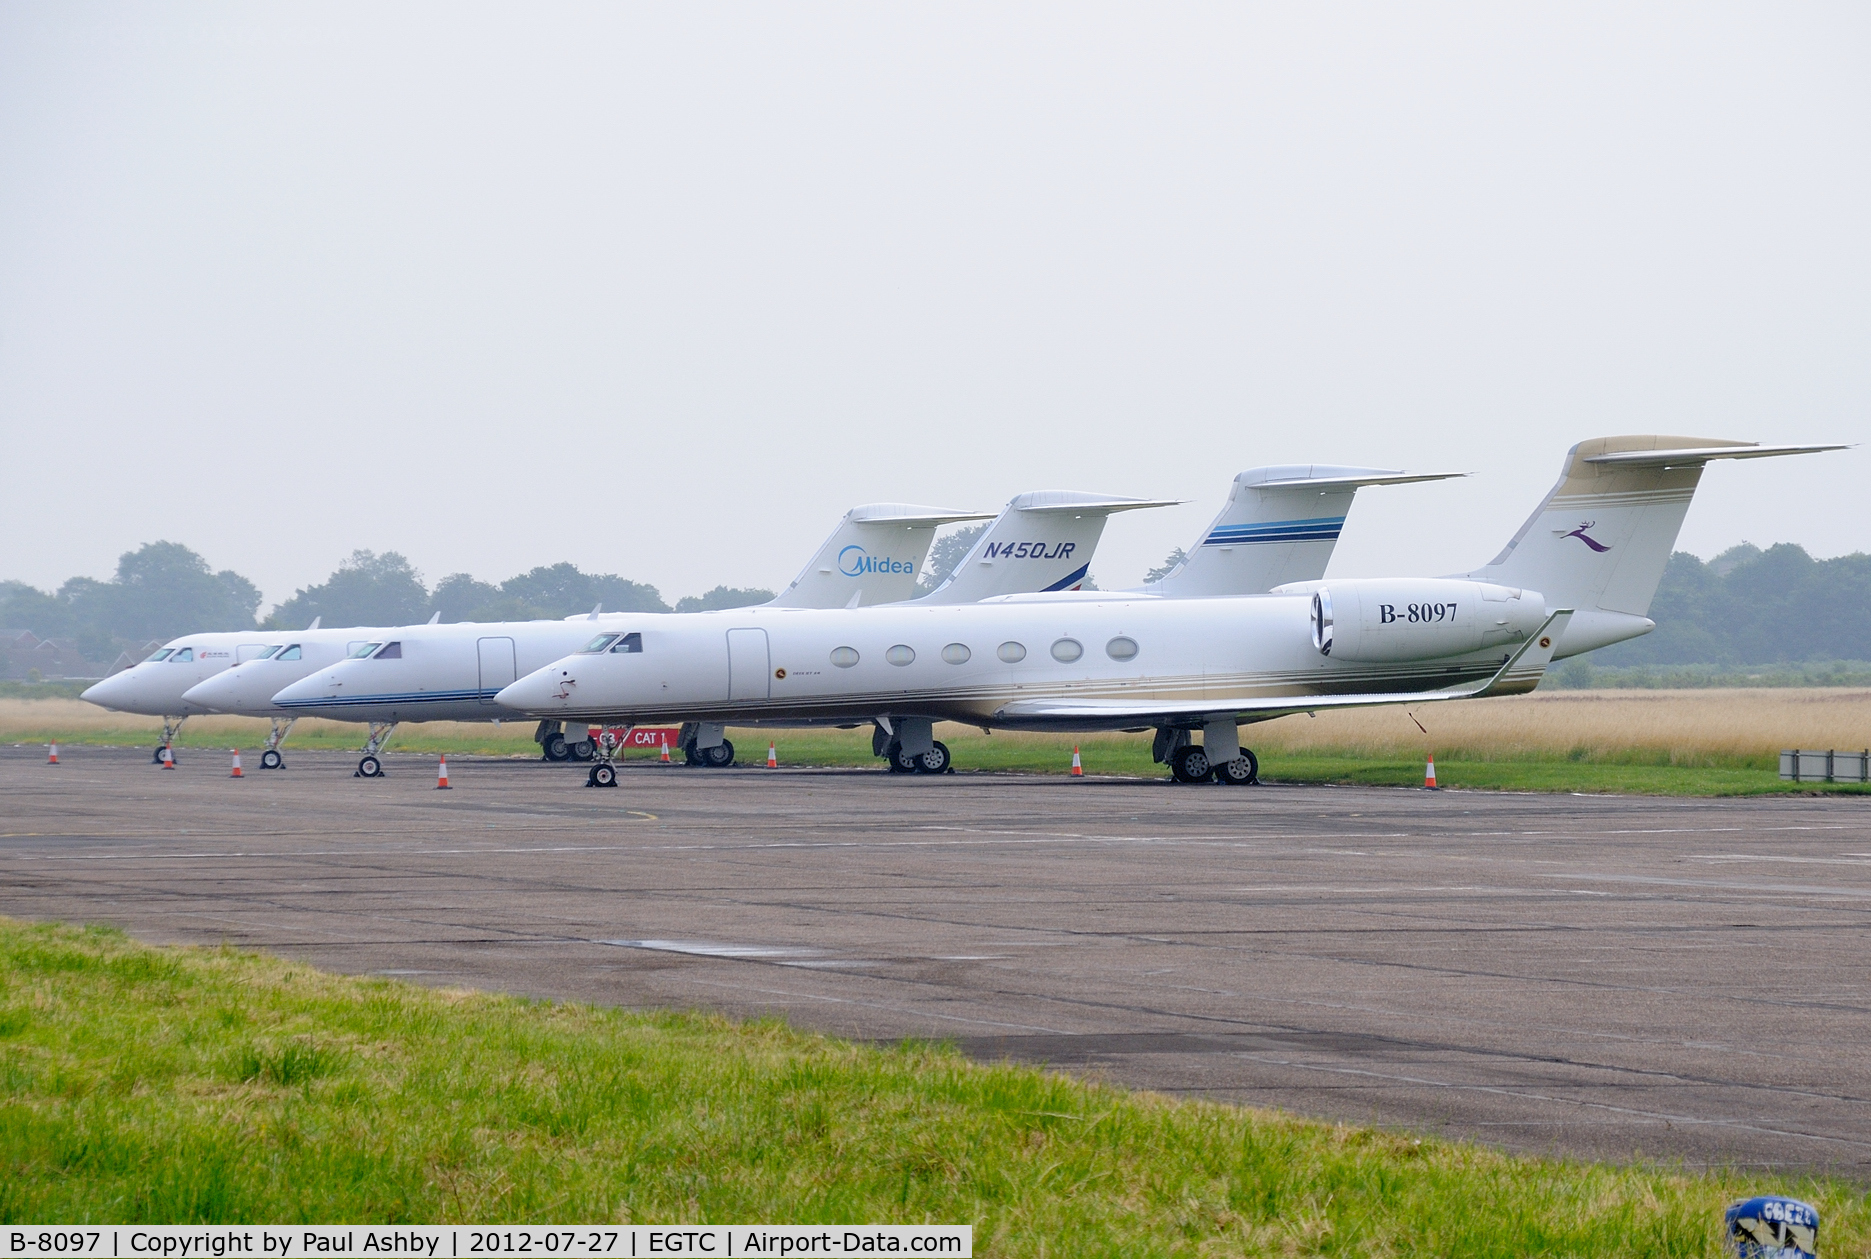 B-8097, 2000 Gulfstream Aerospace G-V C/N 613, Gulfstream G-V parked at Cranfield while visiting for the Olympics